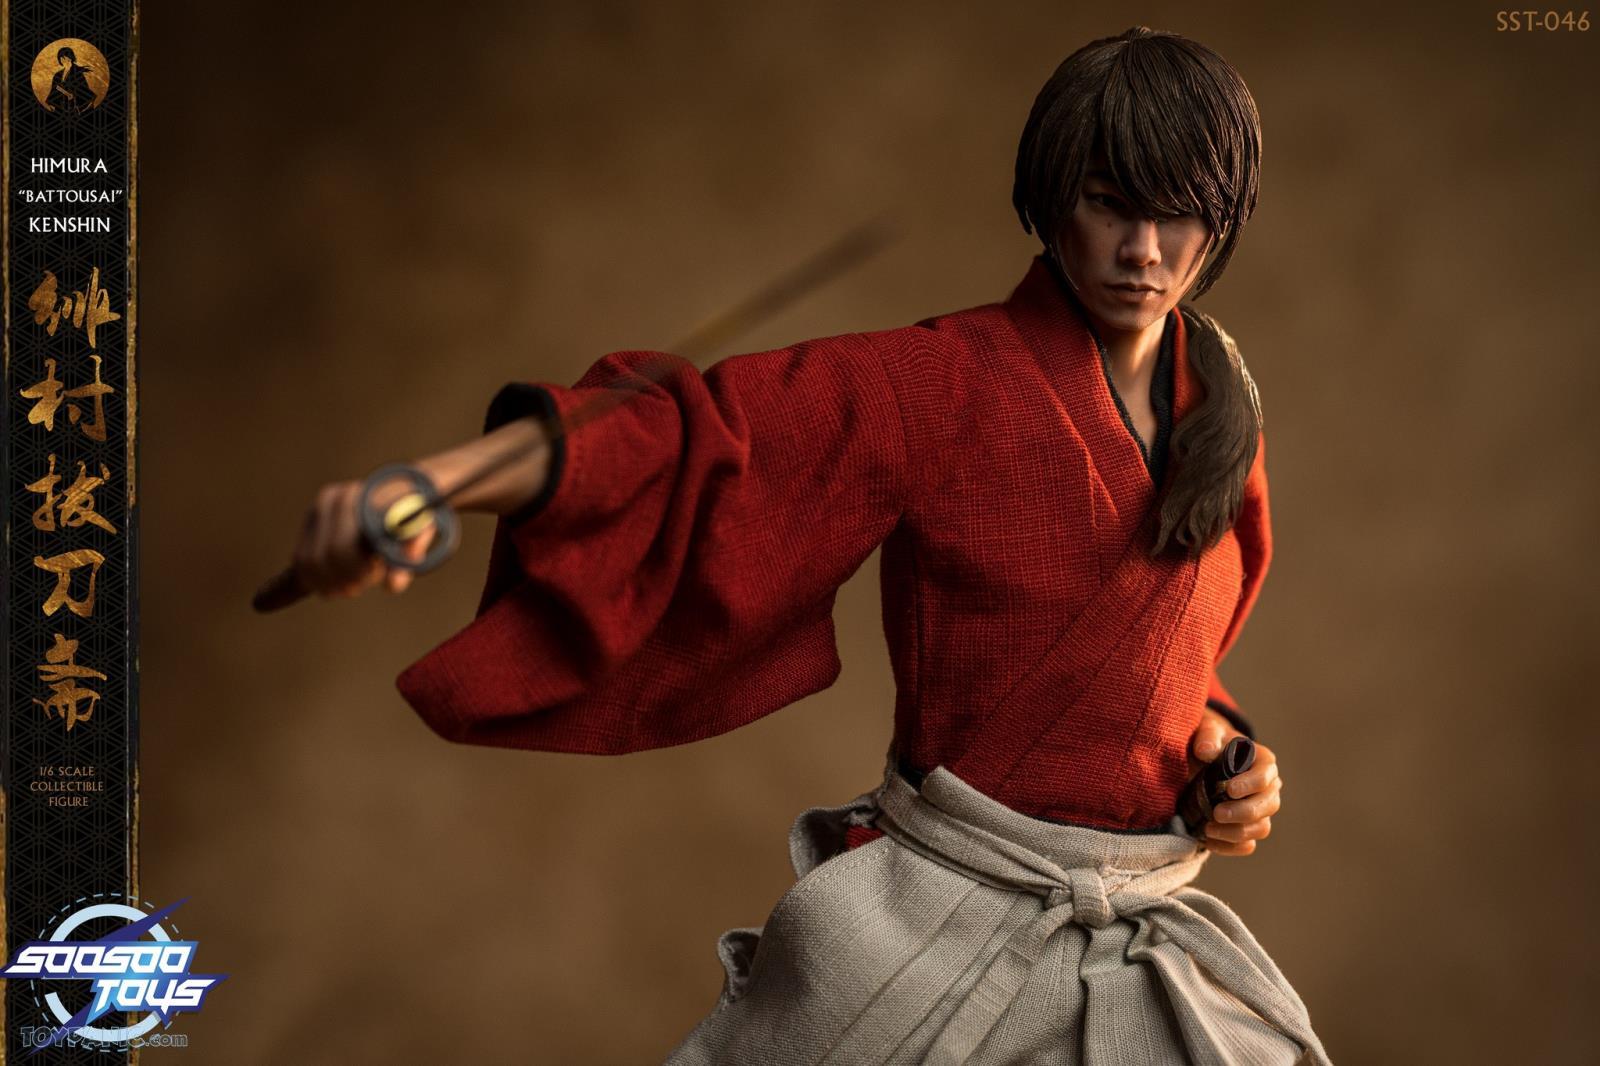 kenshin - NEW PRODUCT: 1/6 scale Rurouni Kenshin Collectible Figure from SooSooToys 712202251228PM_287534